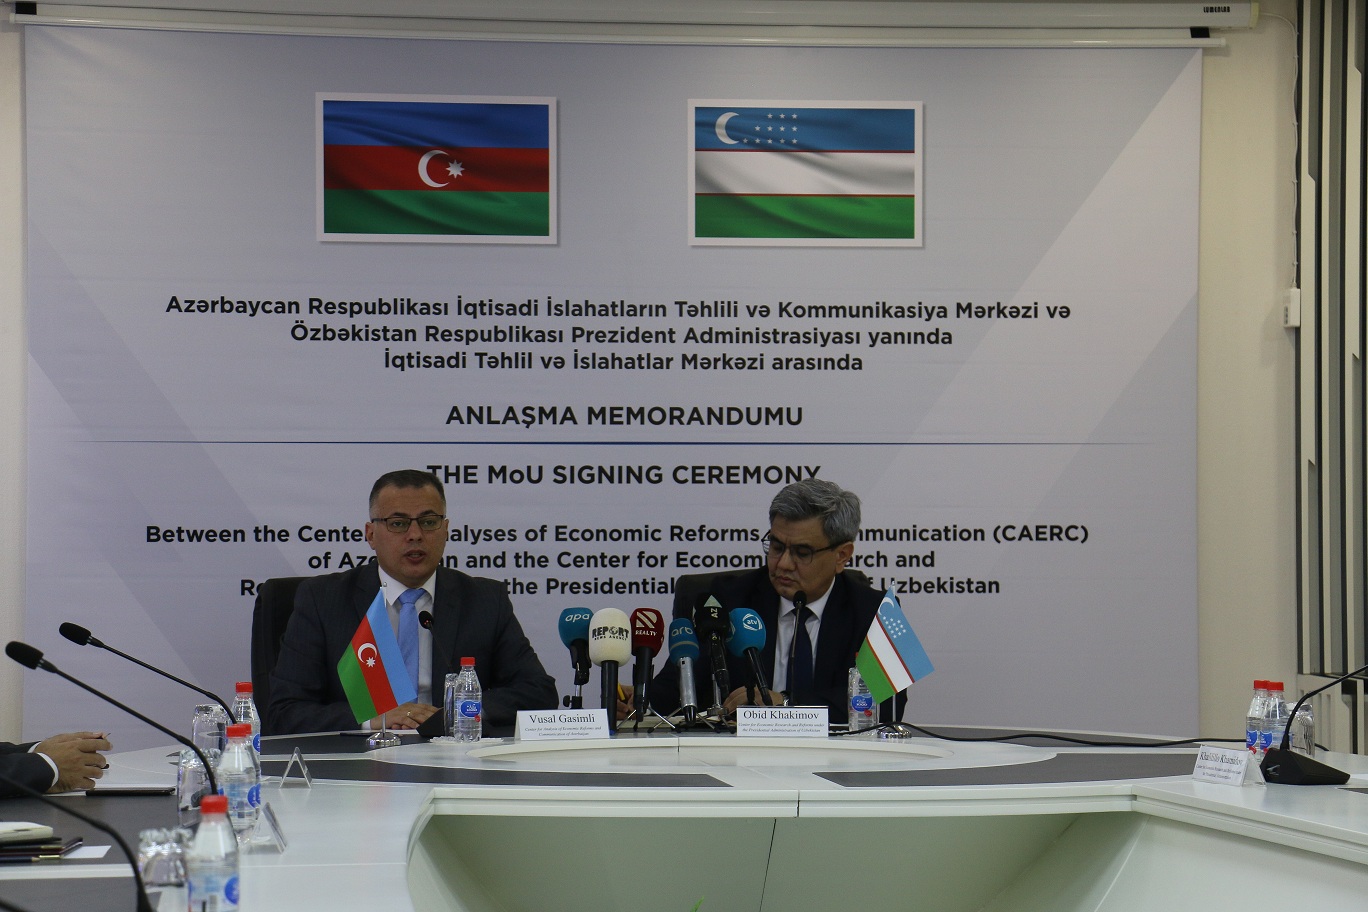 A Memorandum  was signed between the Center for Analysis of Economic  Reforms and Communication and the Center for Economic Research and Reforms under the Presidential Administration of the Republic of Uzbekistan